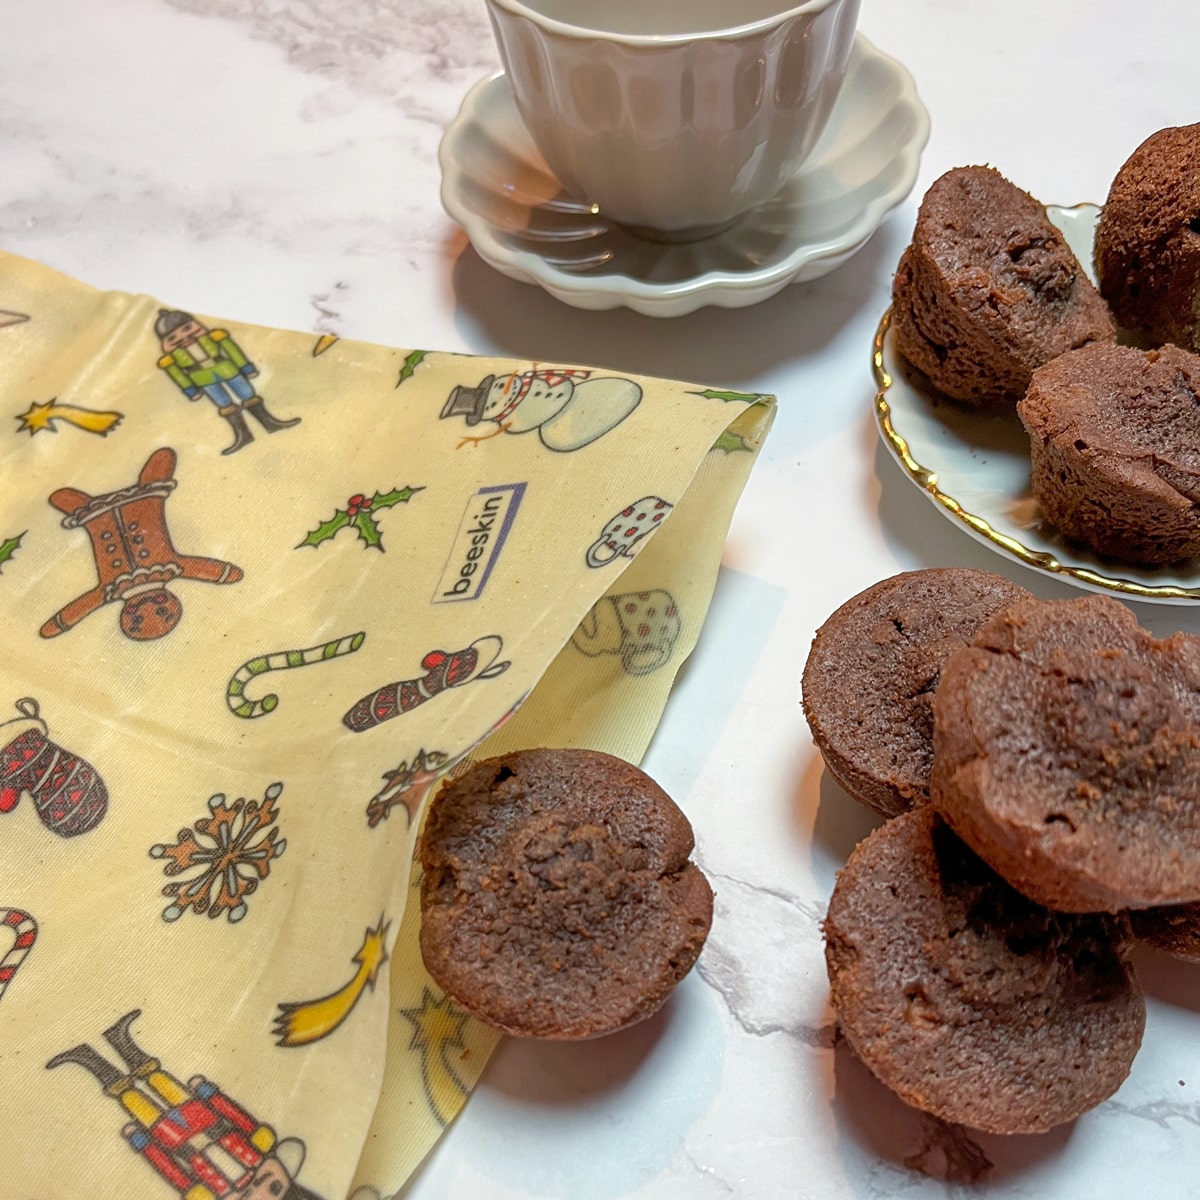 showing a beeskin beeswax bag in Christmas design with small images such as nutcrackers or stars. To the right are little brownies and at the back of the image is a small cup of coffee. 